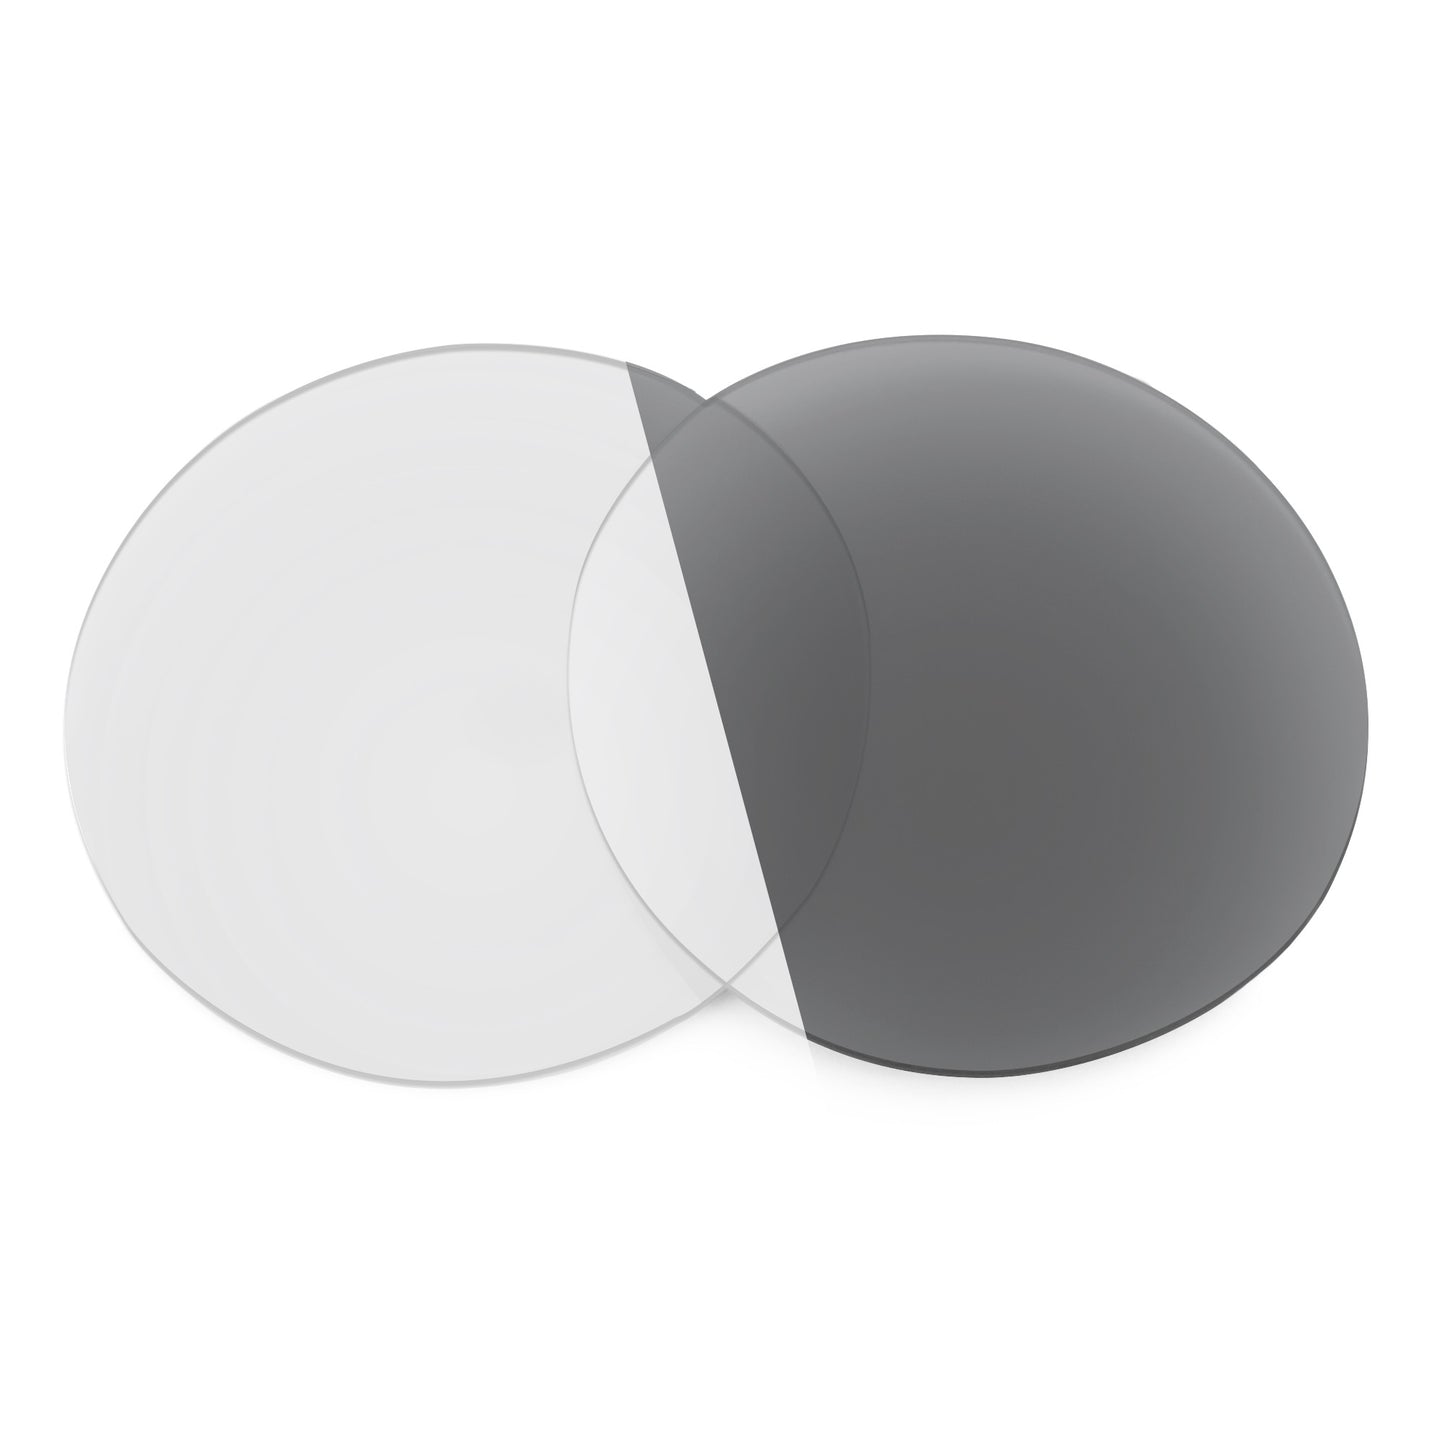 Revant replacement lenses for Ray-Ban Oval RB3547N 54mm Non-Polarized Adapt Gray Photochromic